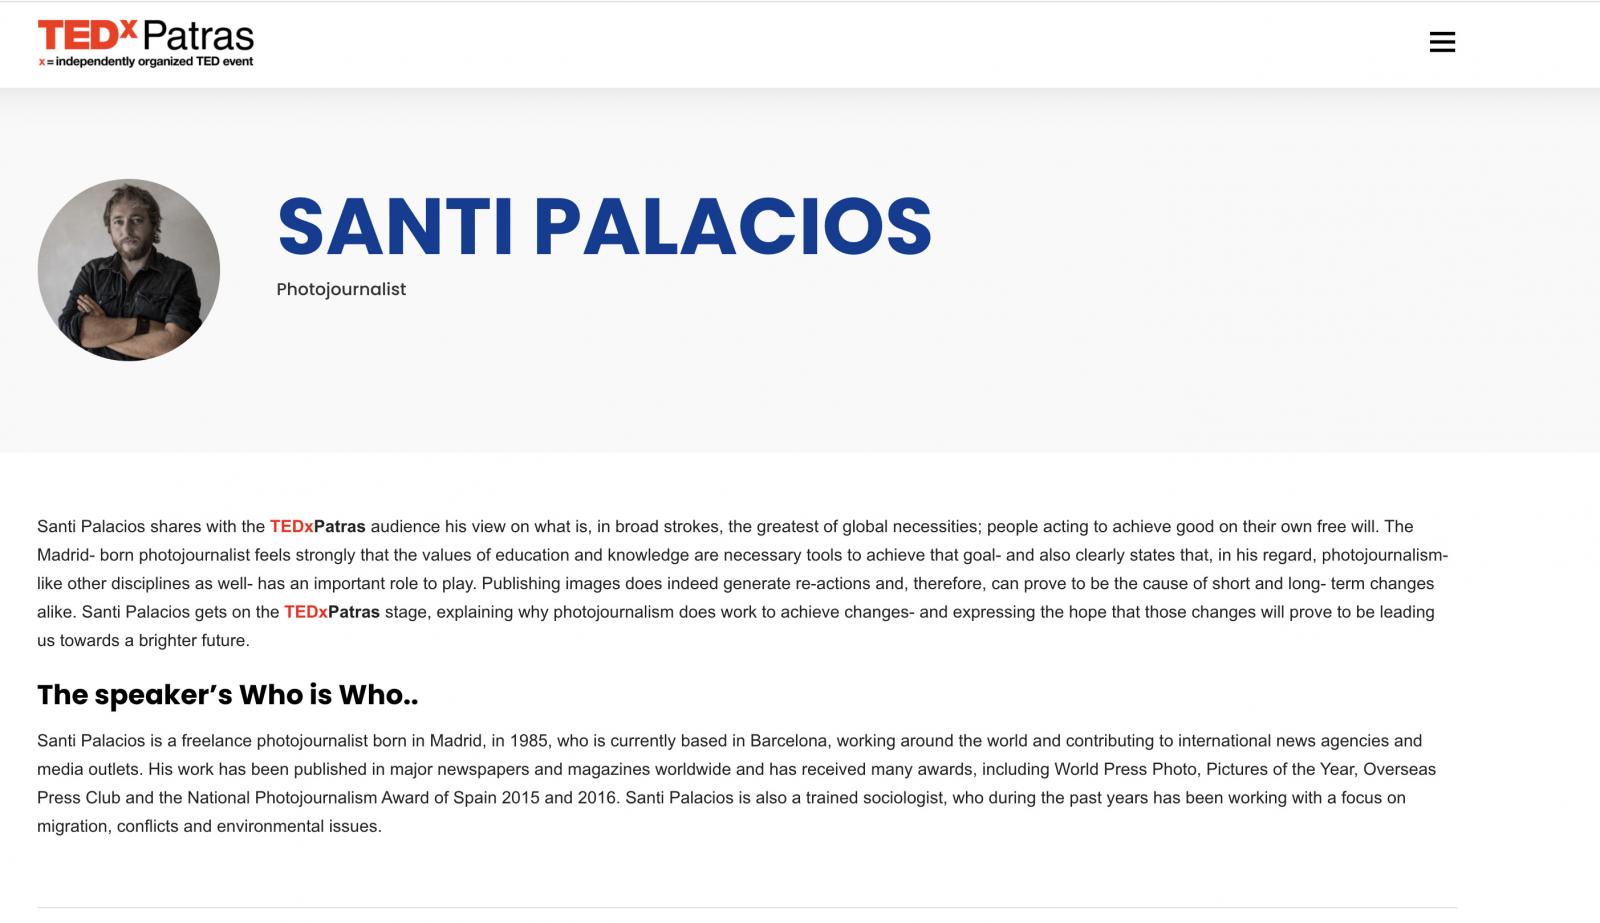 Thumbnail of  Santi Palacios shares with the _nmental issues. Follow the link 